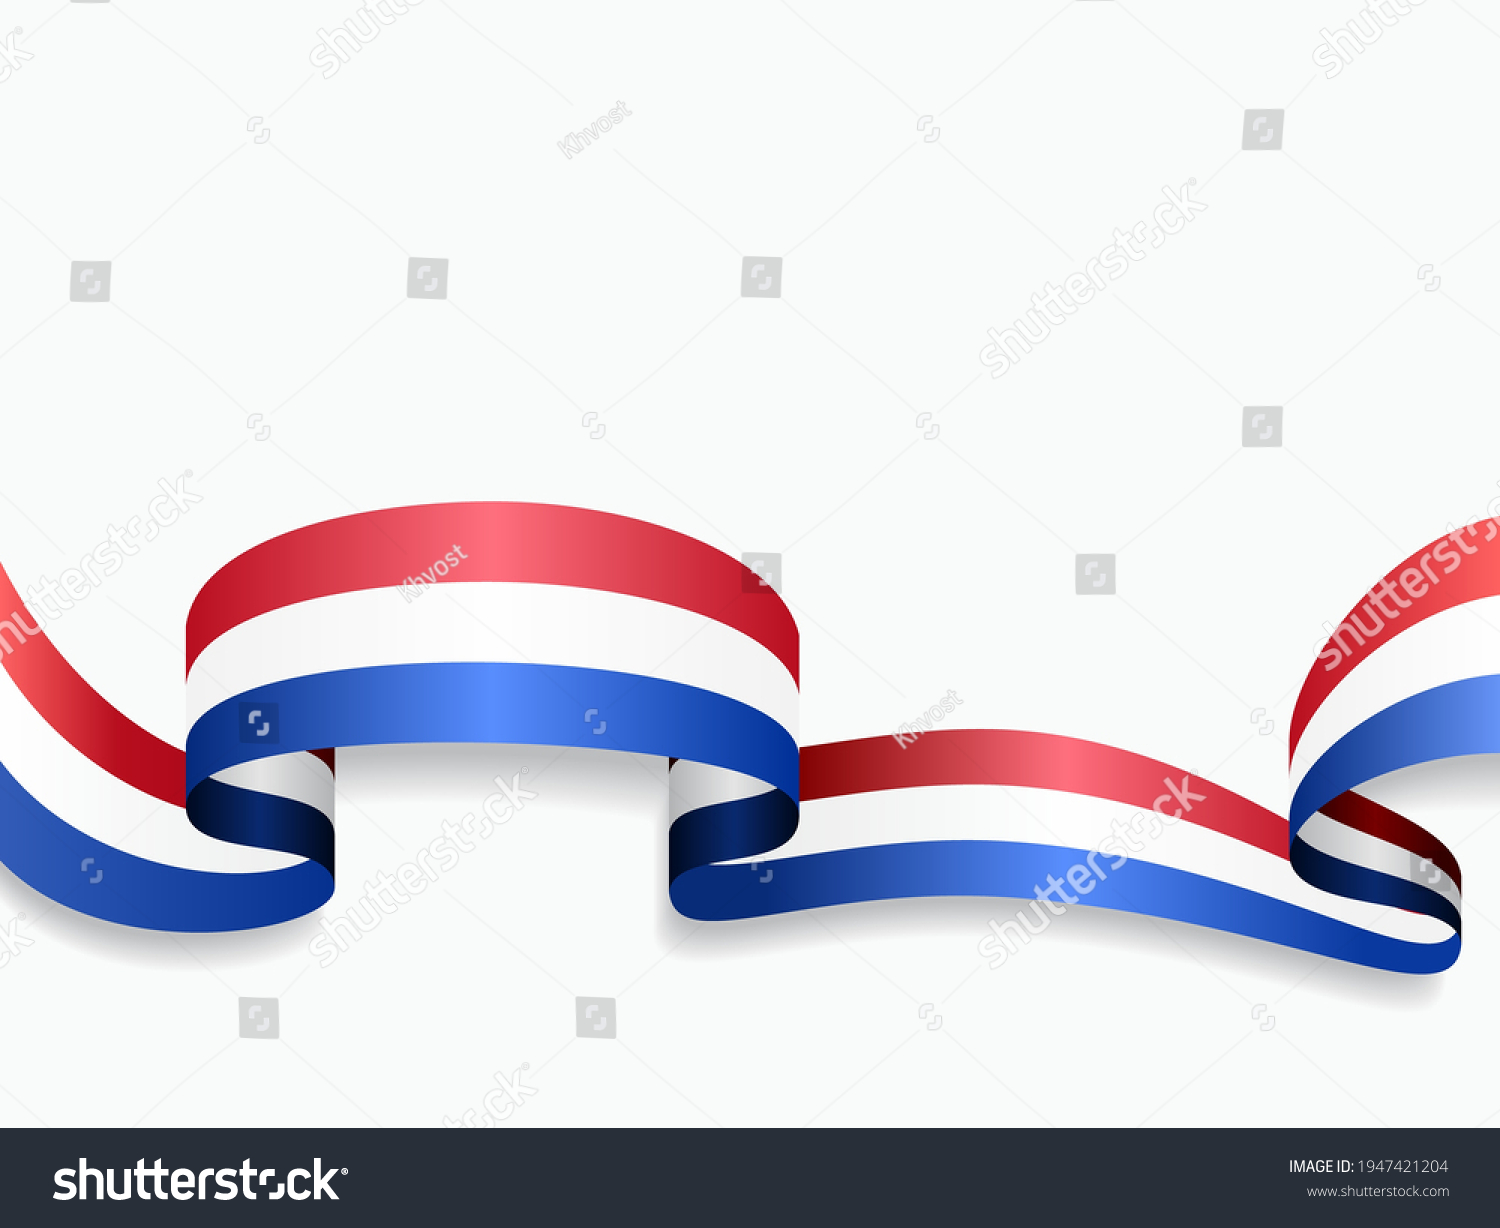 Dutch Flag Wavy Abstract Background Vector Stock Vector (Royalty Free ...